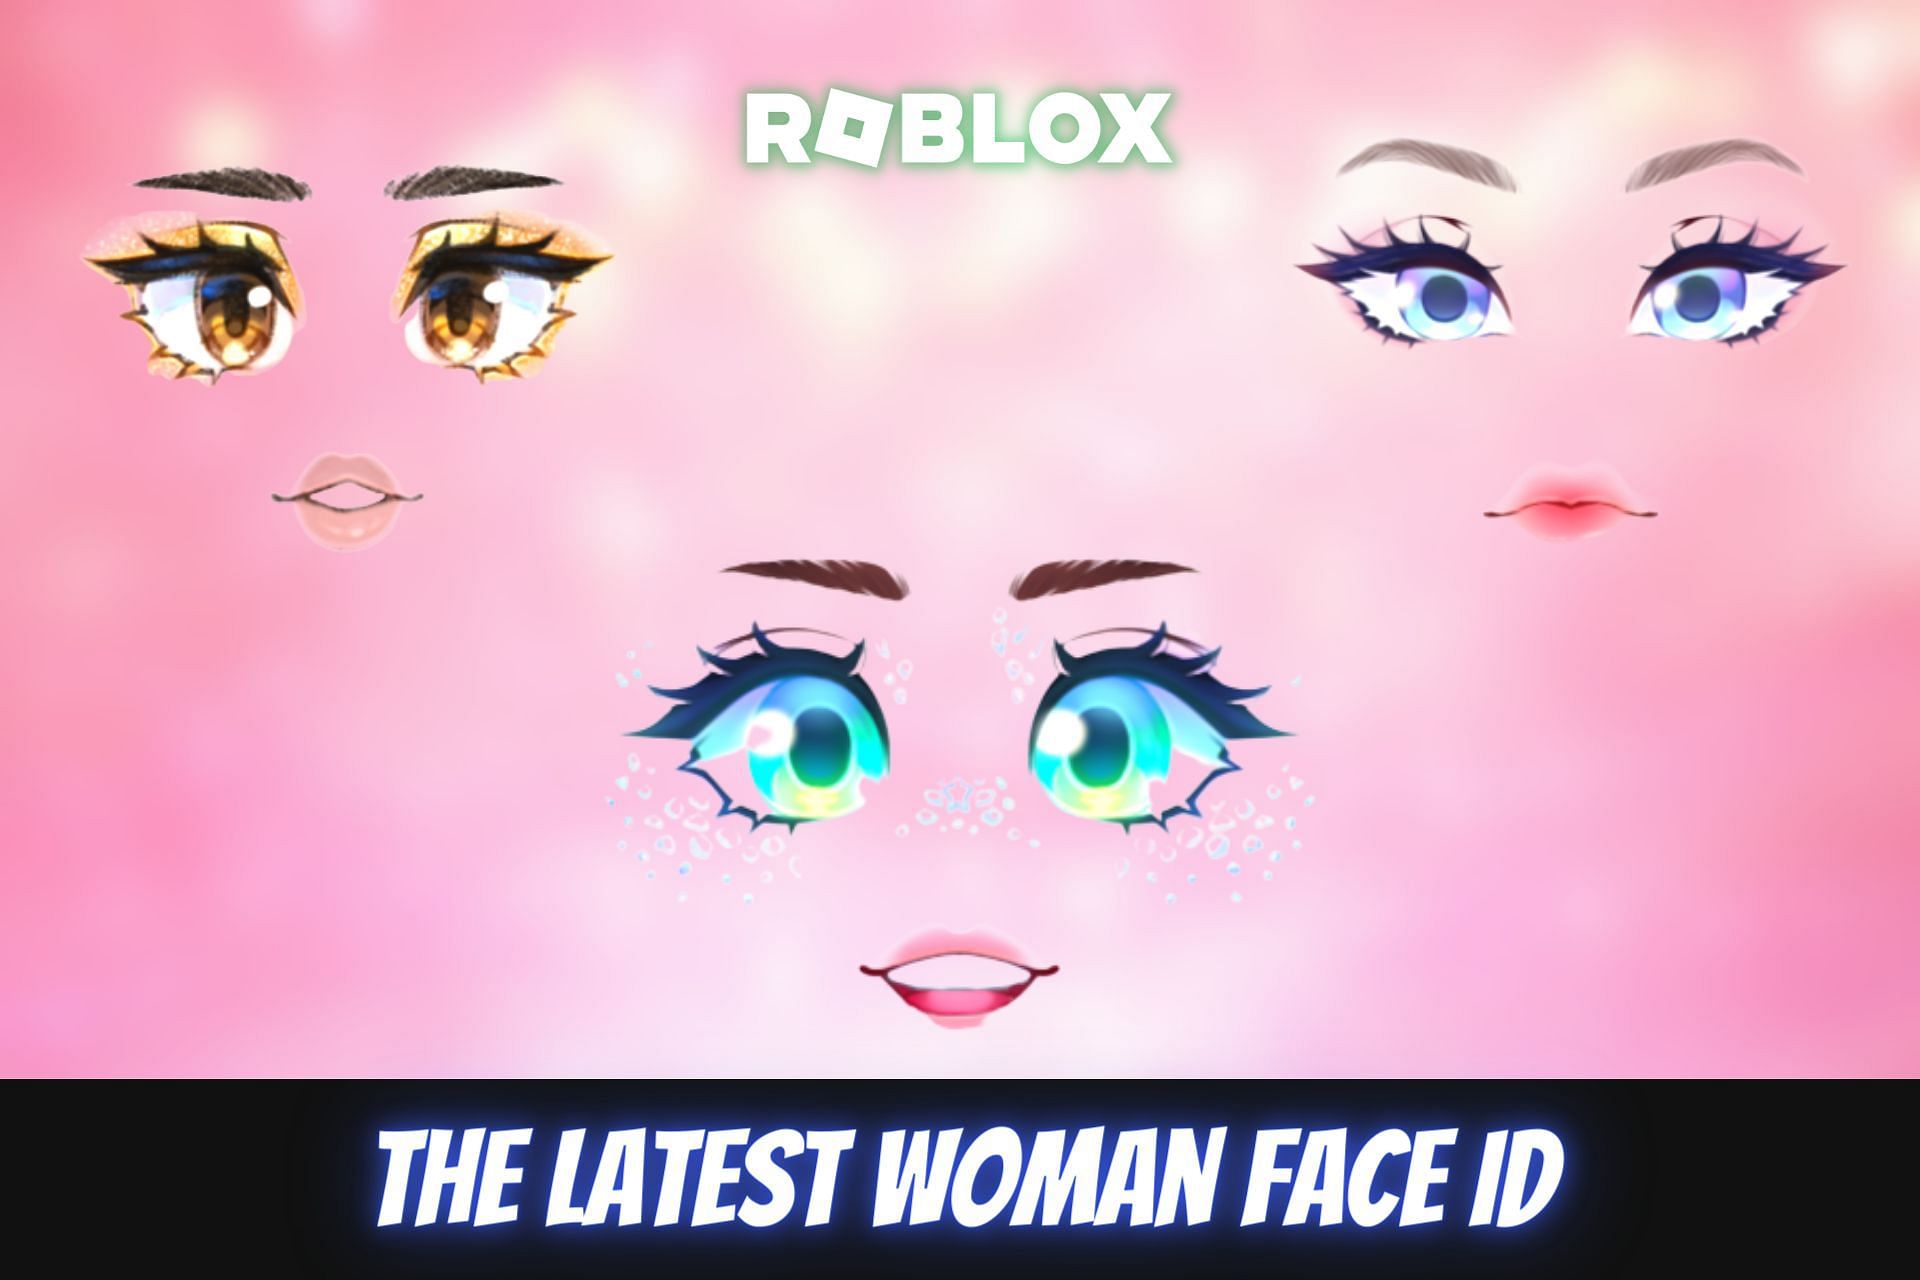 Full list of Roblox face accessories and IDs